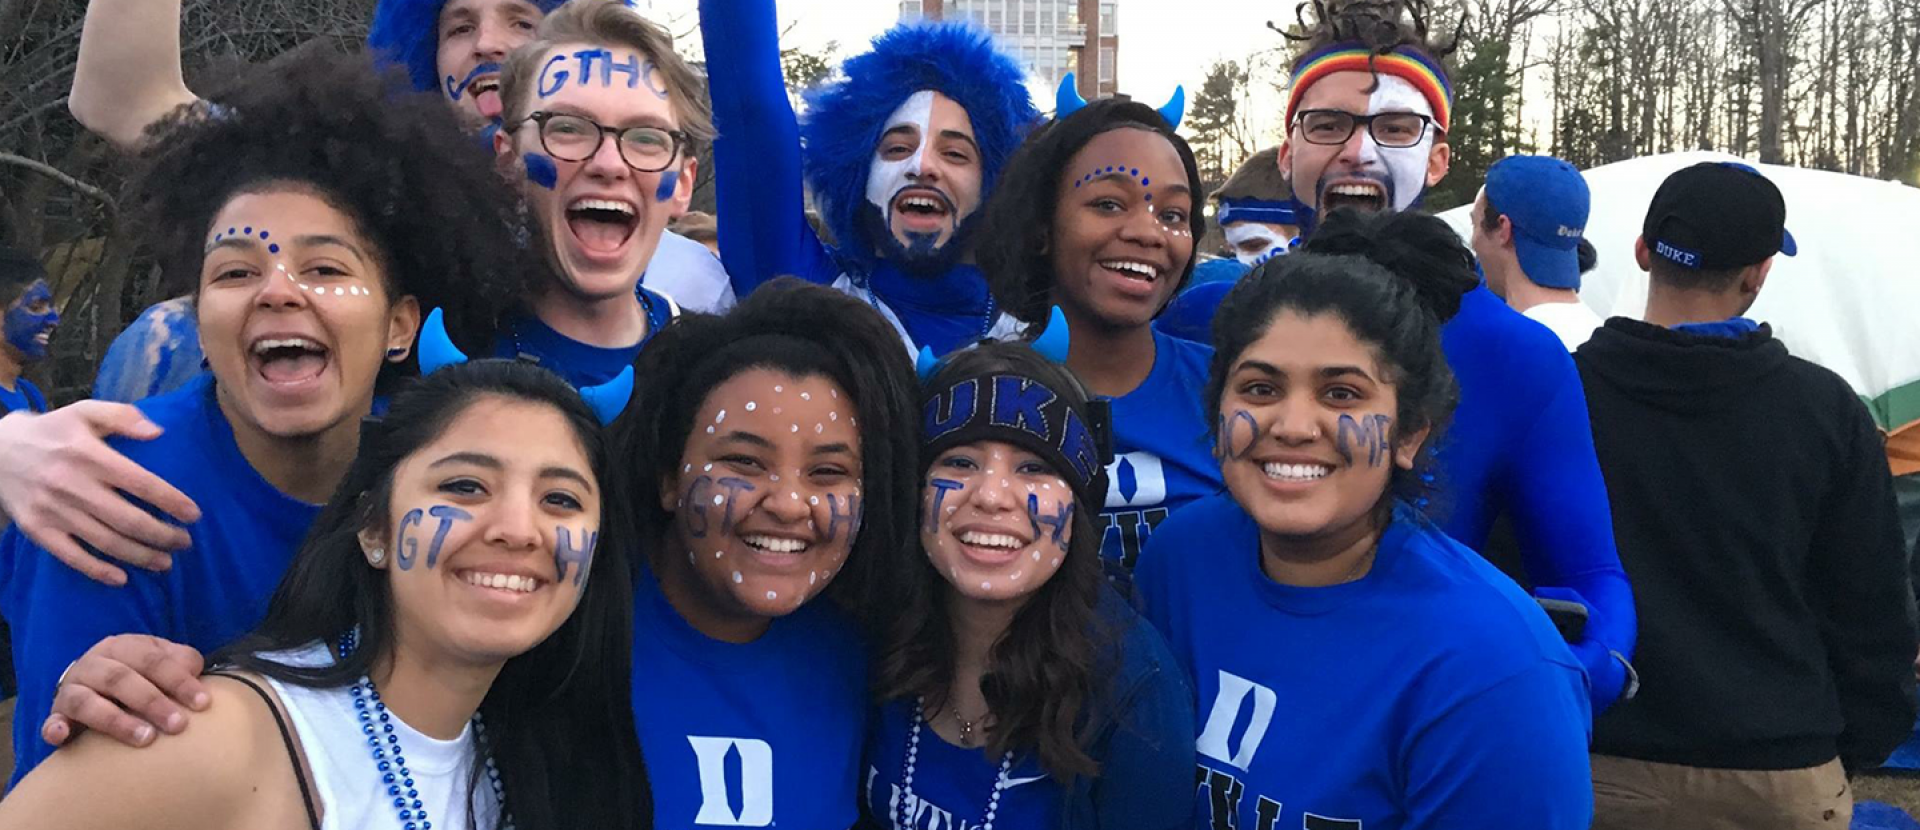 Yodit and friends excited for a Duke game